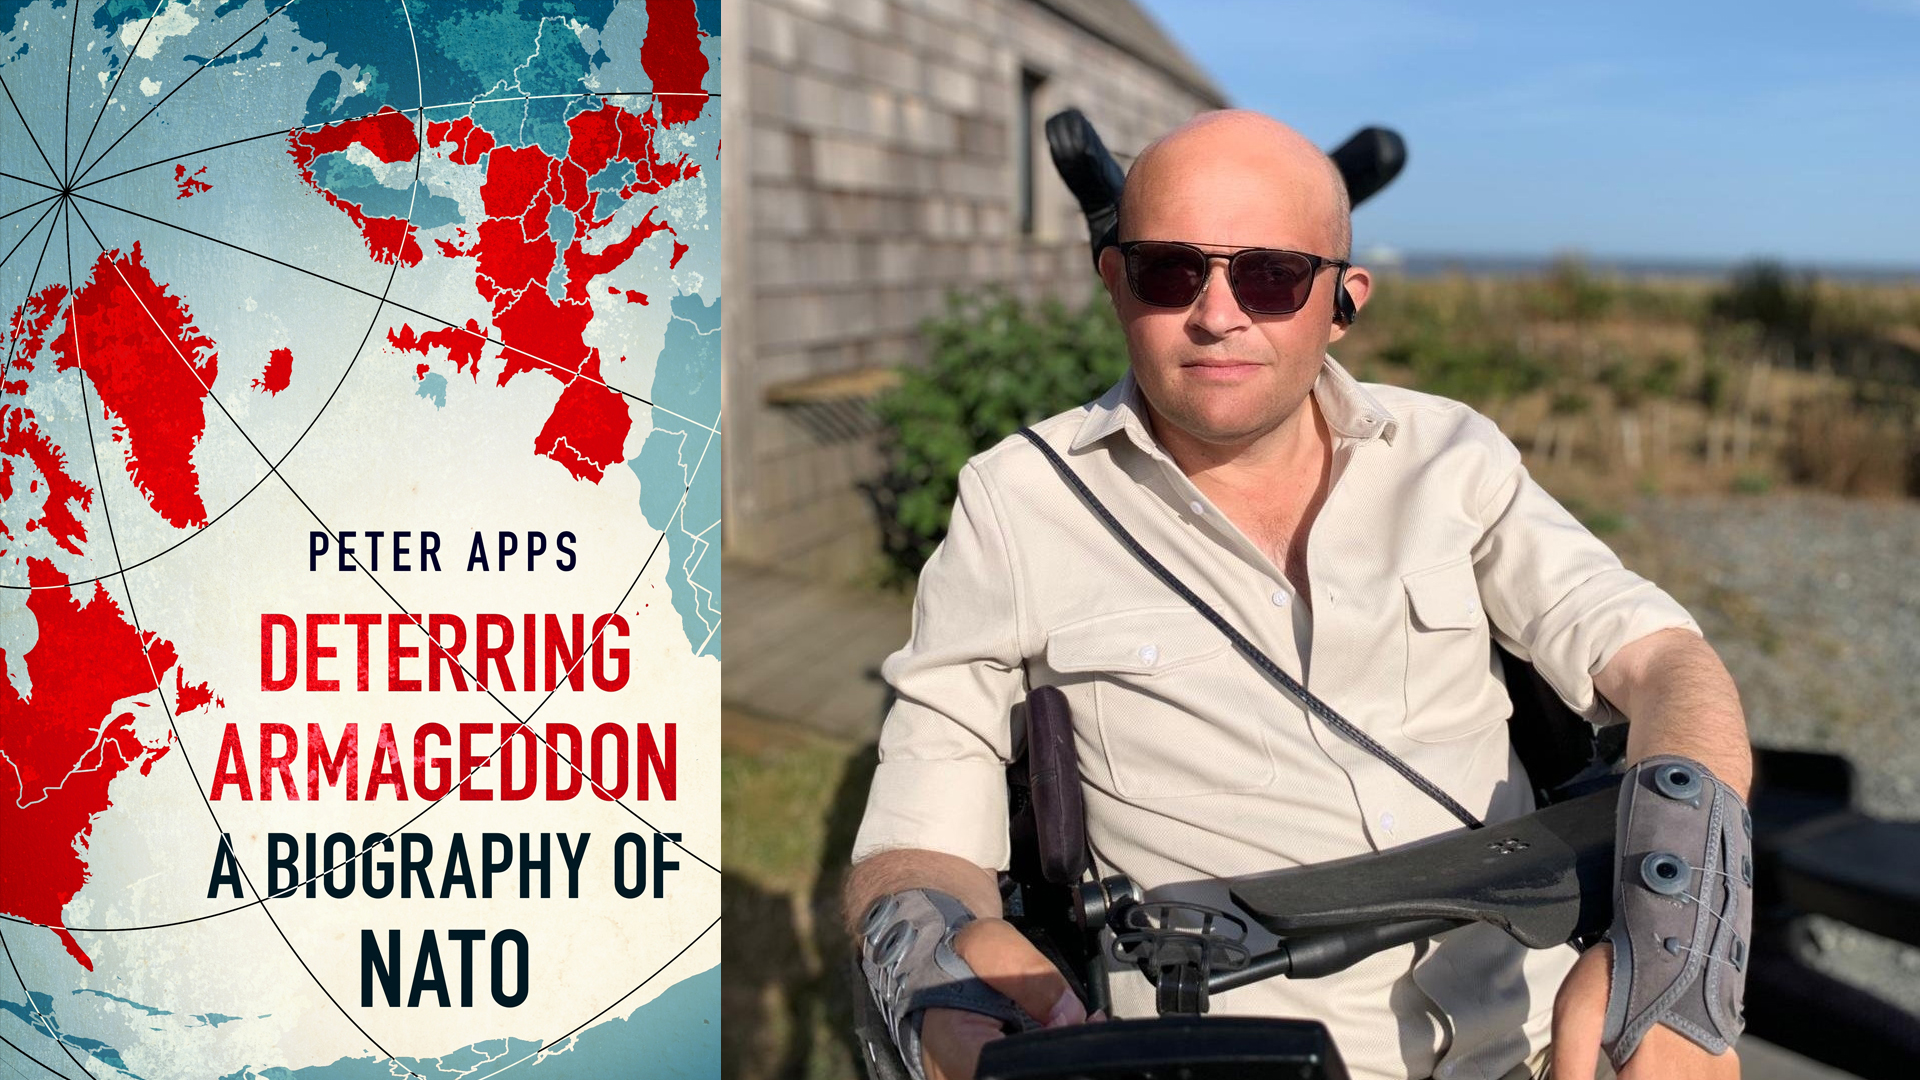 Peter Apps: Deterring Armageddon: A Biography of NATO